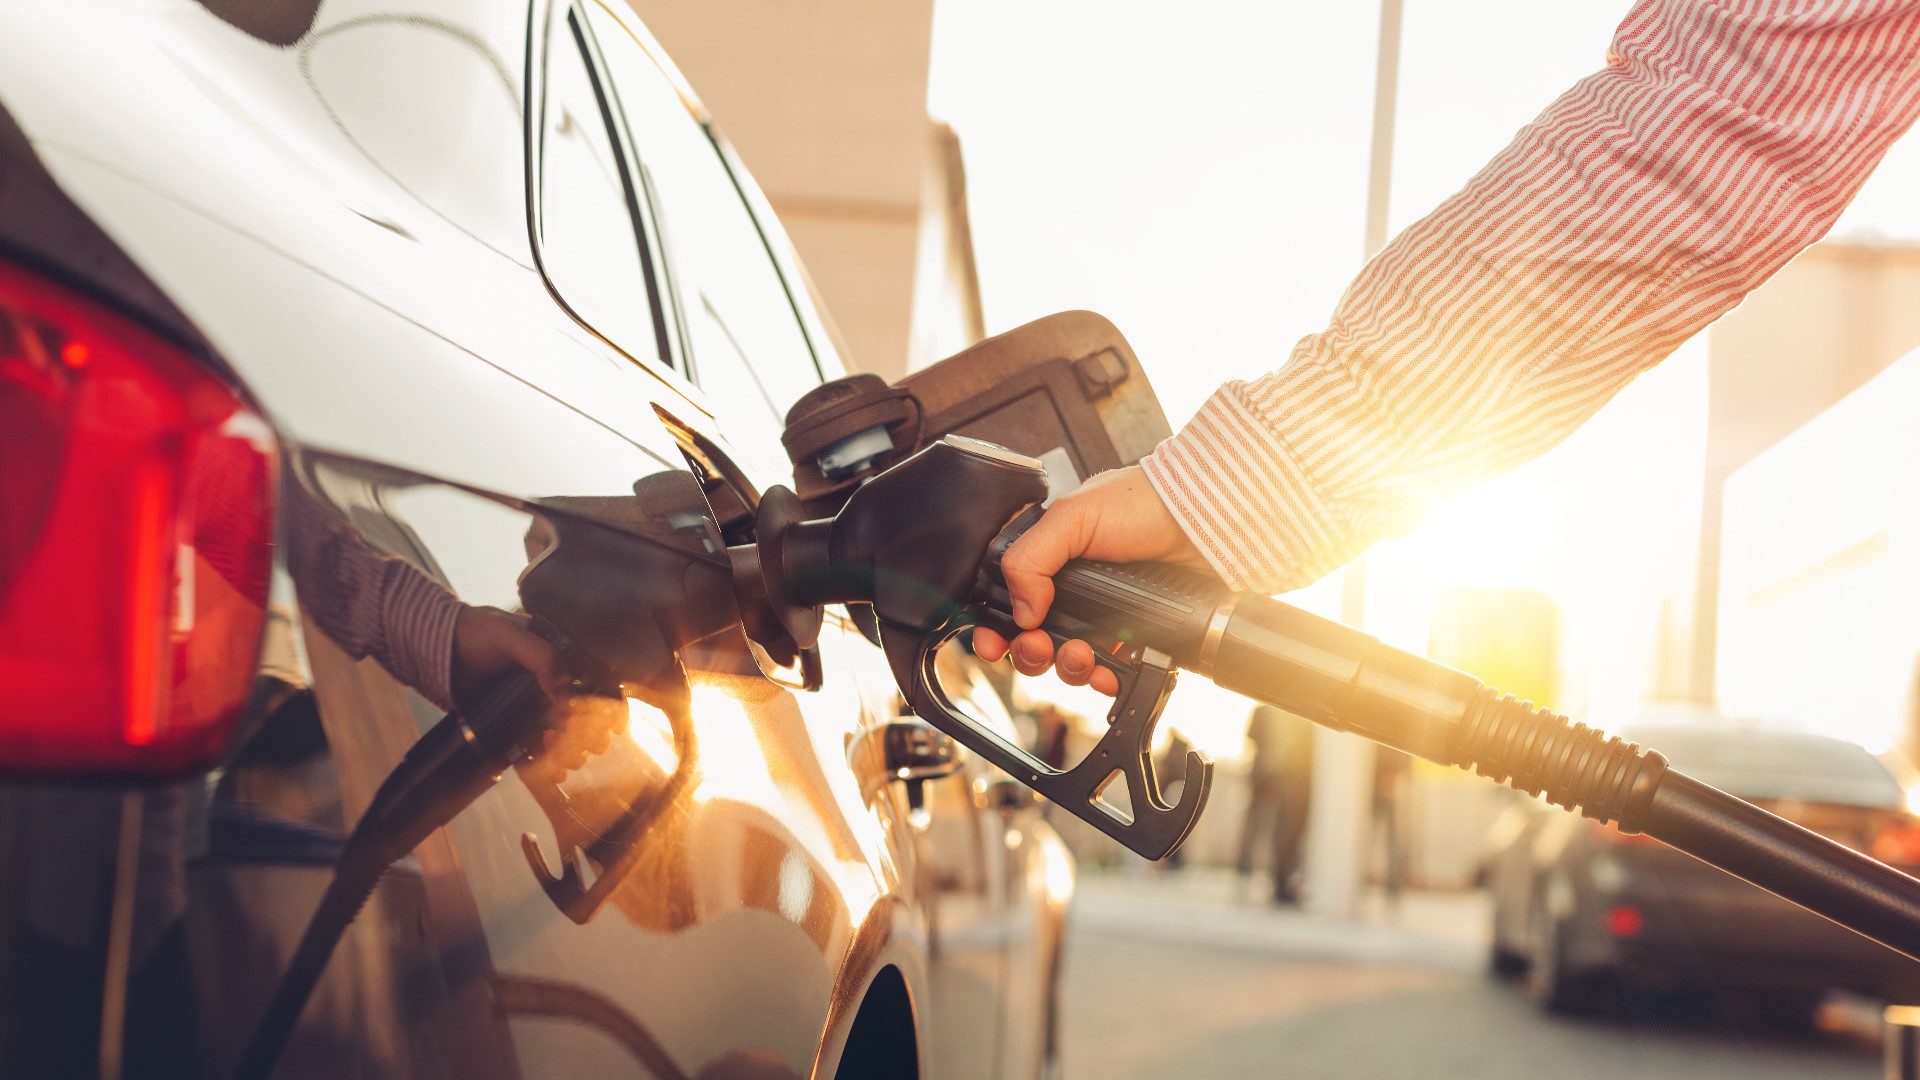 According to The Association for Convenience & Fuel Retailing, the price of gas is determined by a few things, and it can change from one station to another.